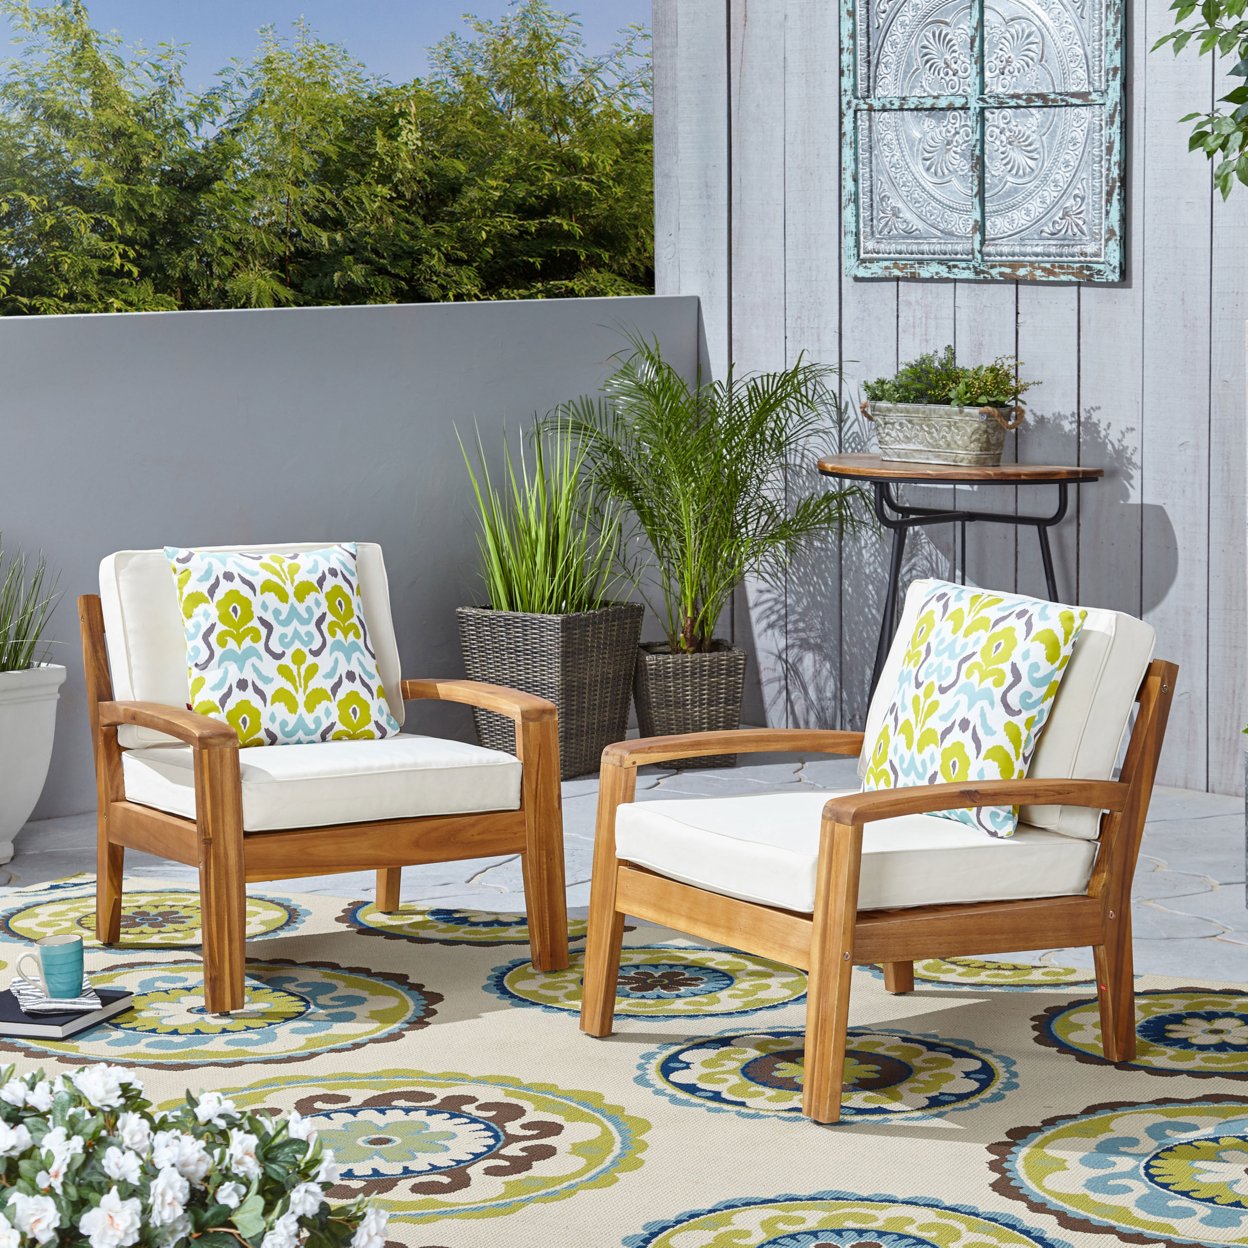 Parma Outdoor Acacia Wood Club Chairs With Cushions (Set Of 2) - Beige